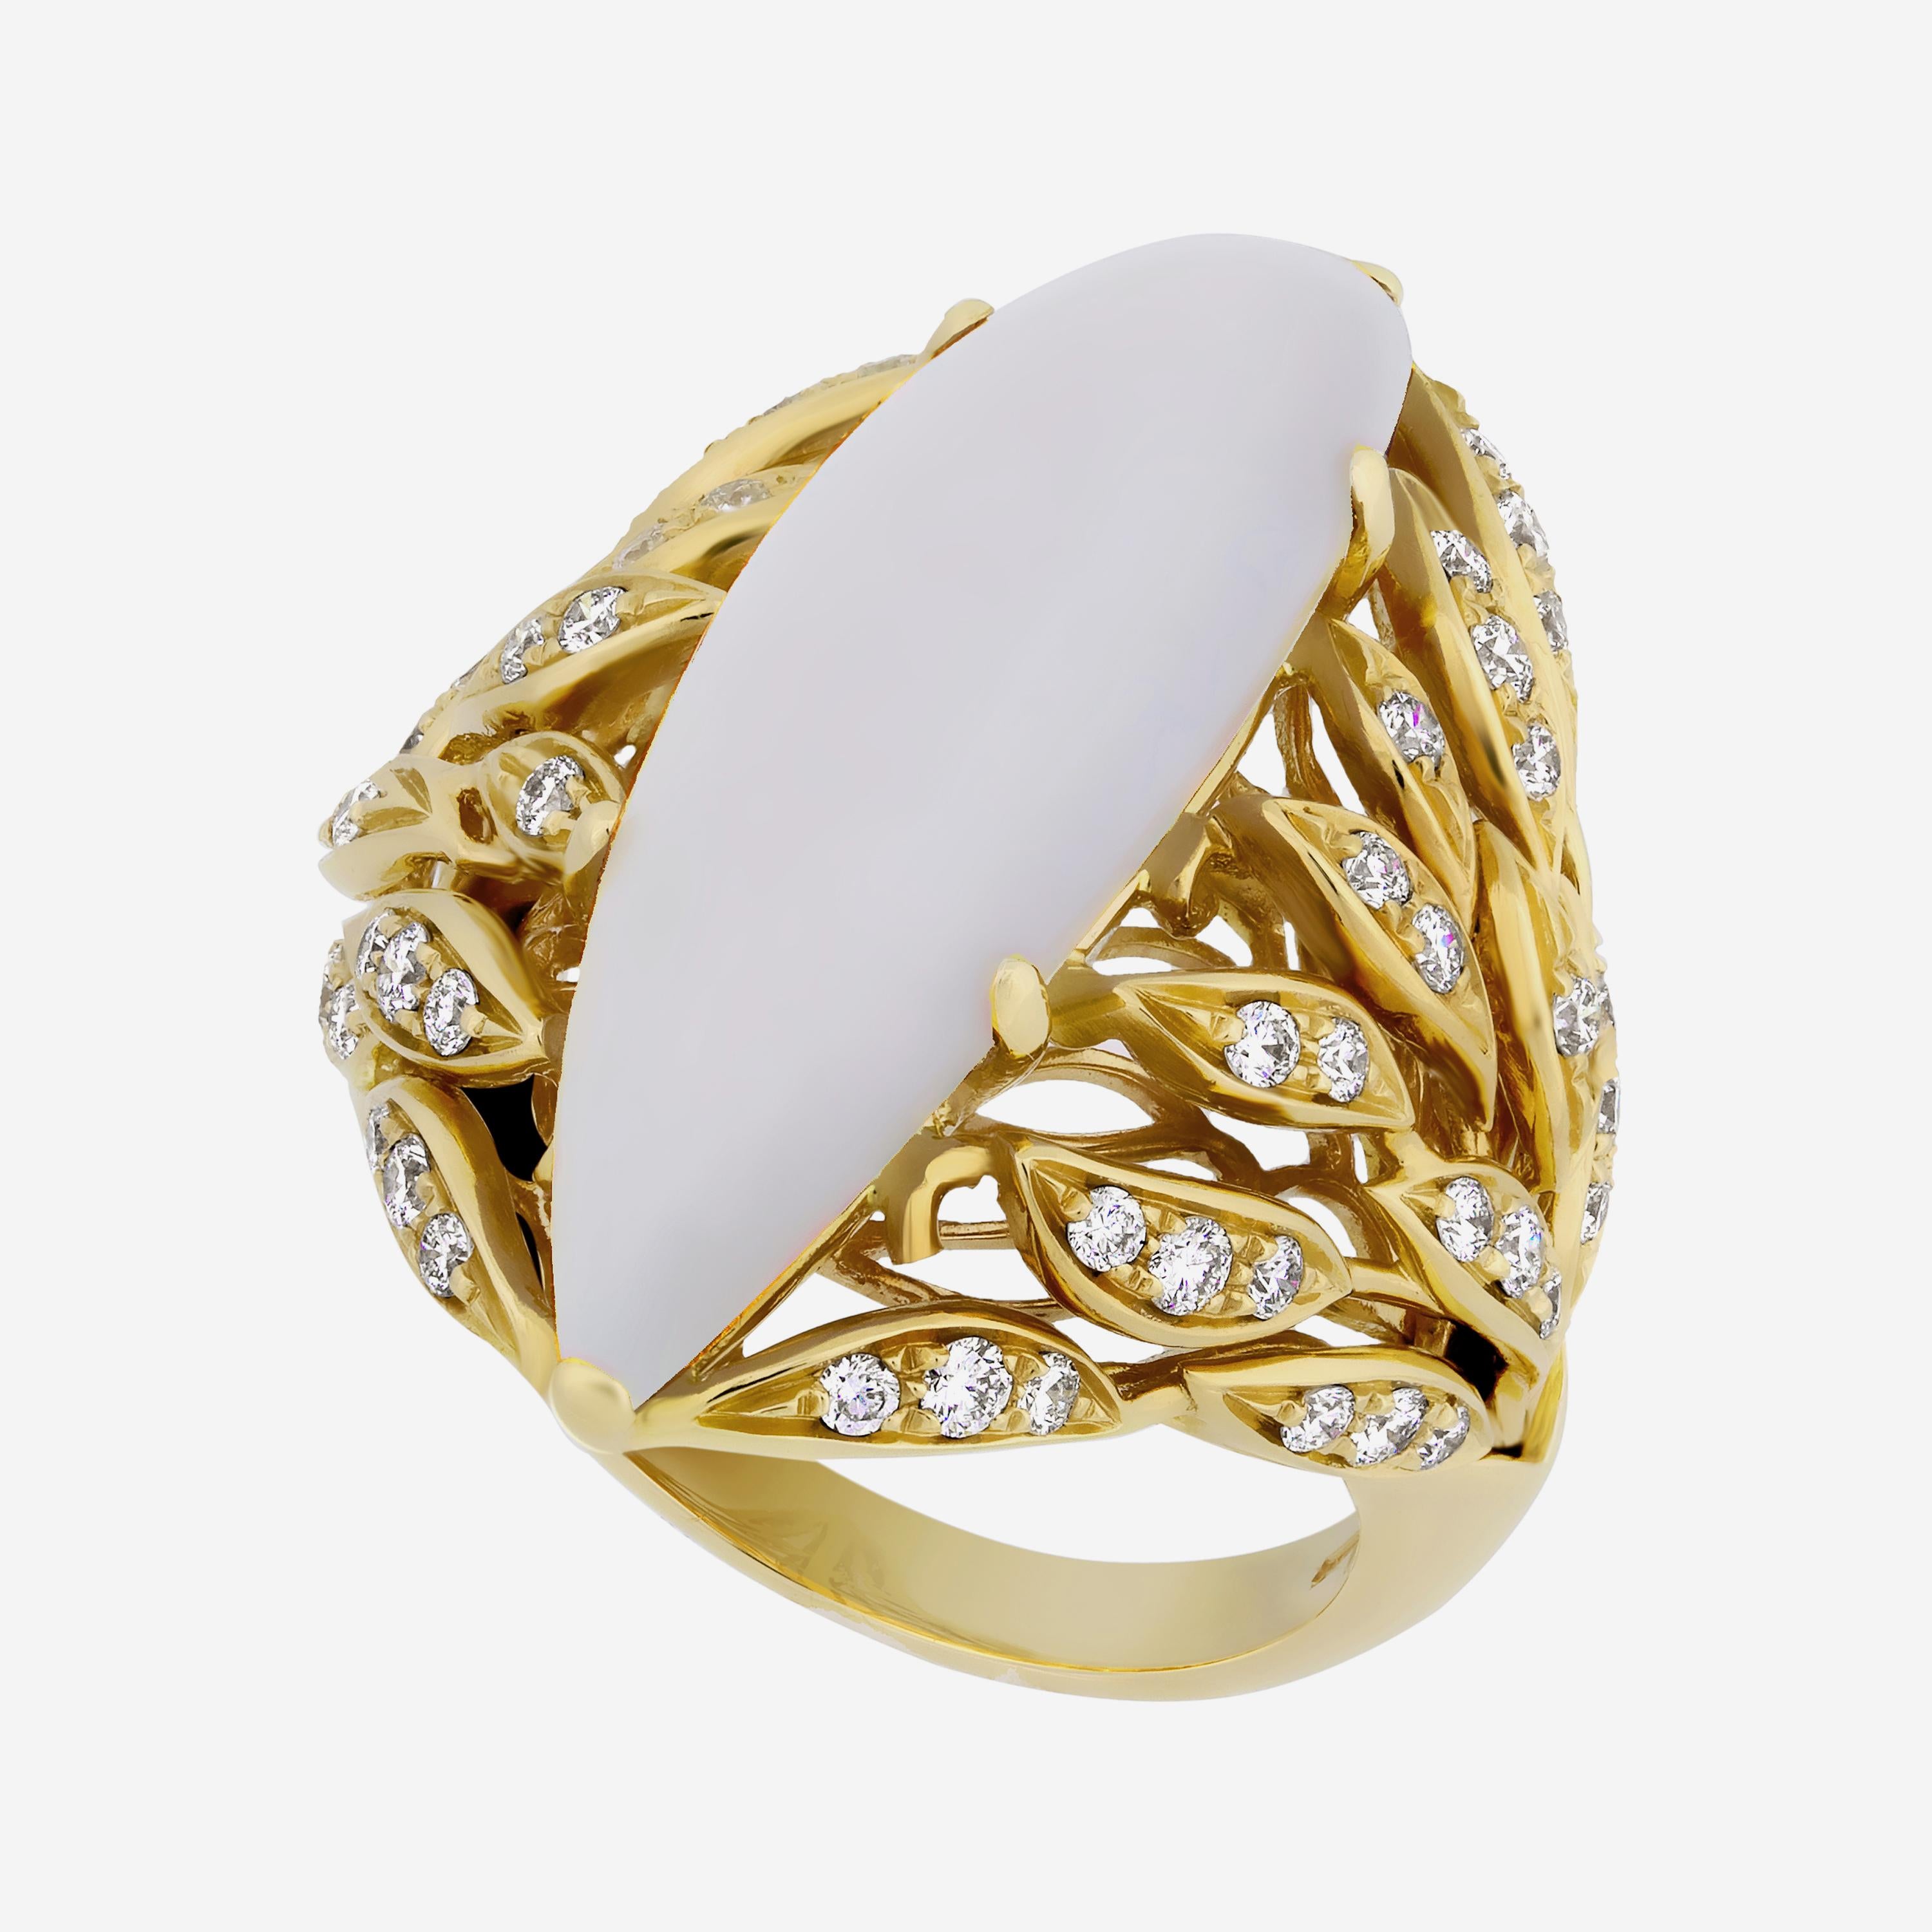 Contemporary Luca Carati 18K Yellow Gold, White Chalcedony and Diamond Ring sz 6.75 For Sale